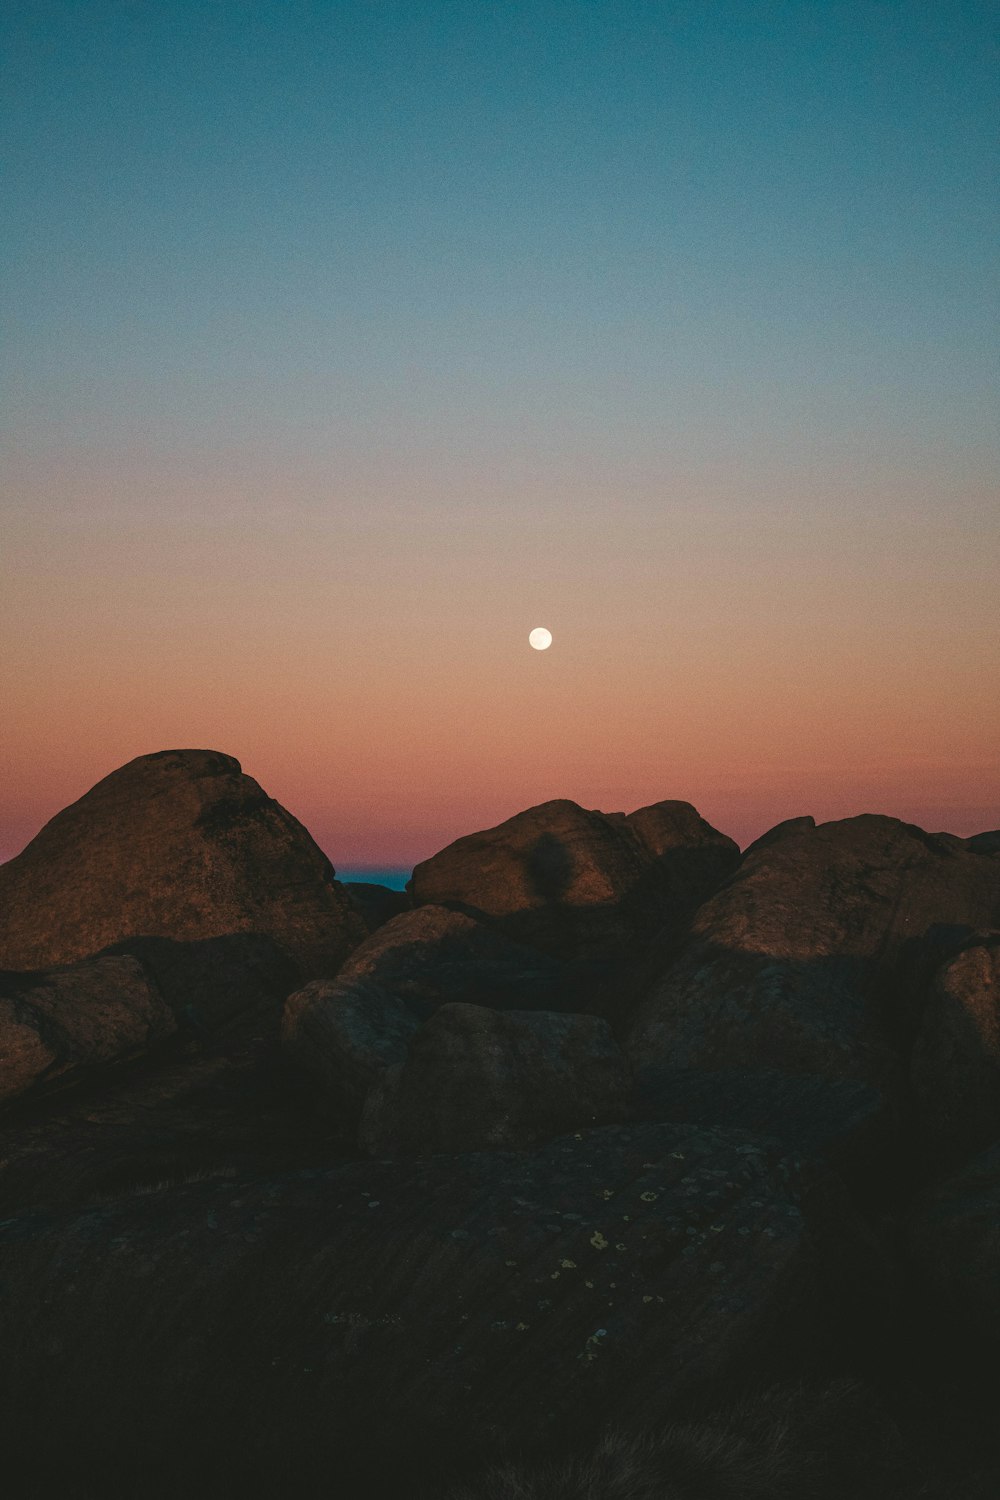 a full moon is seen over some rocks